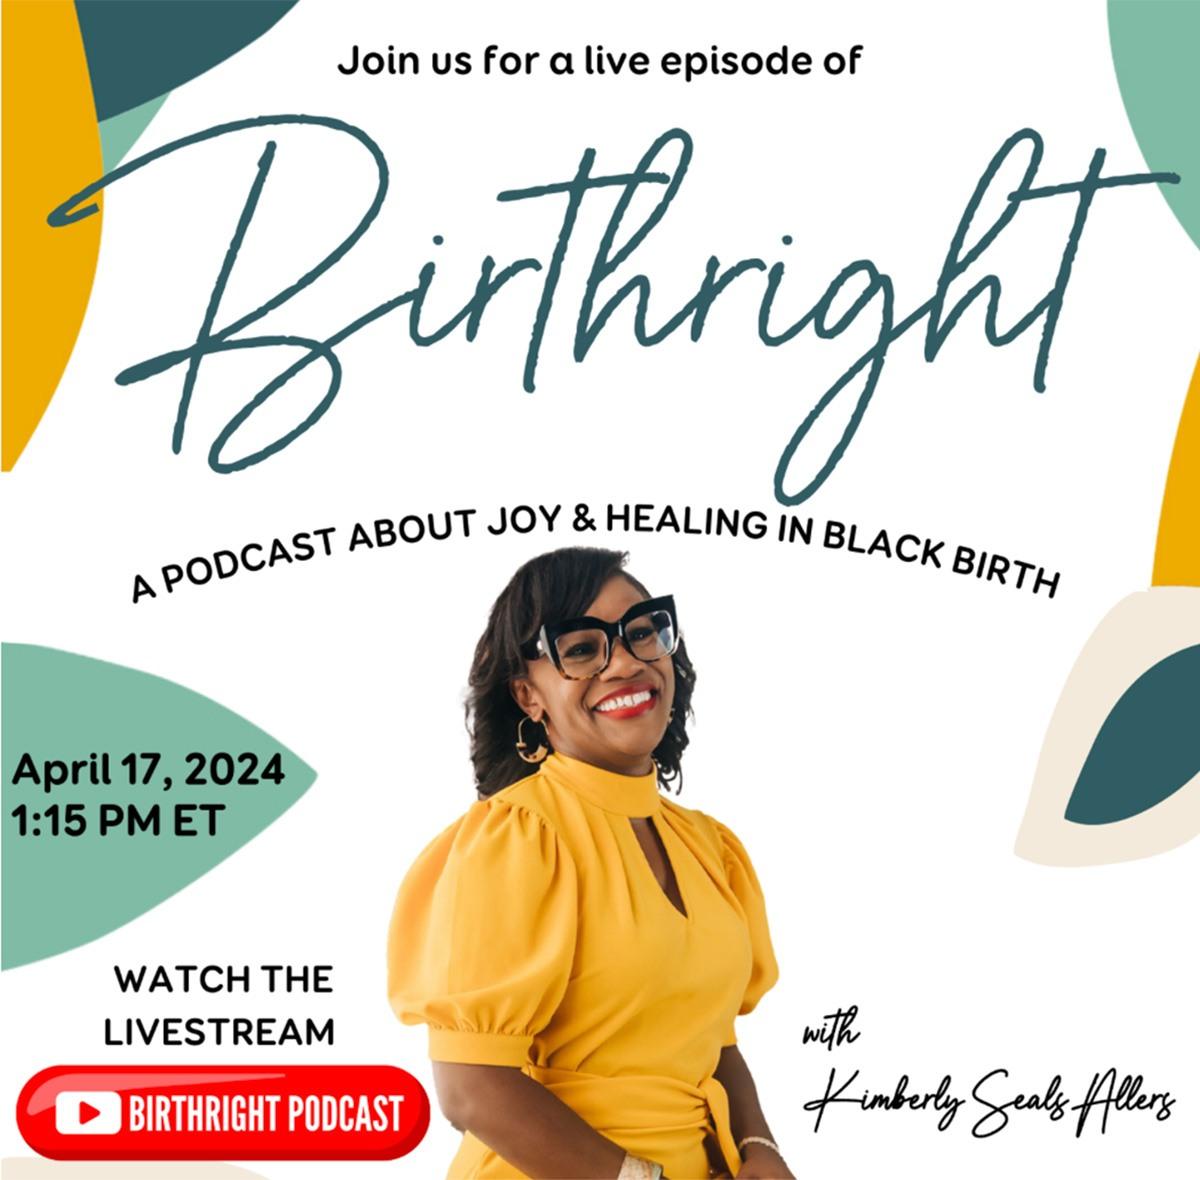 Join us for a live episode of Birthright. A podcast about joy & healing in black birth.